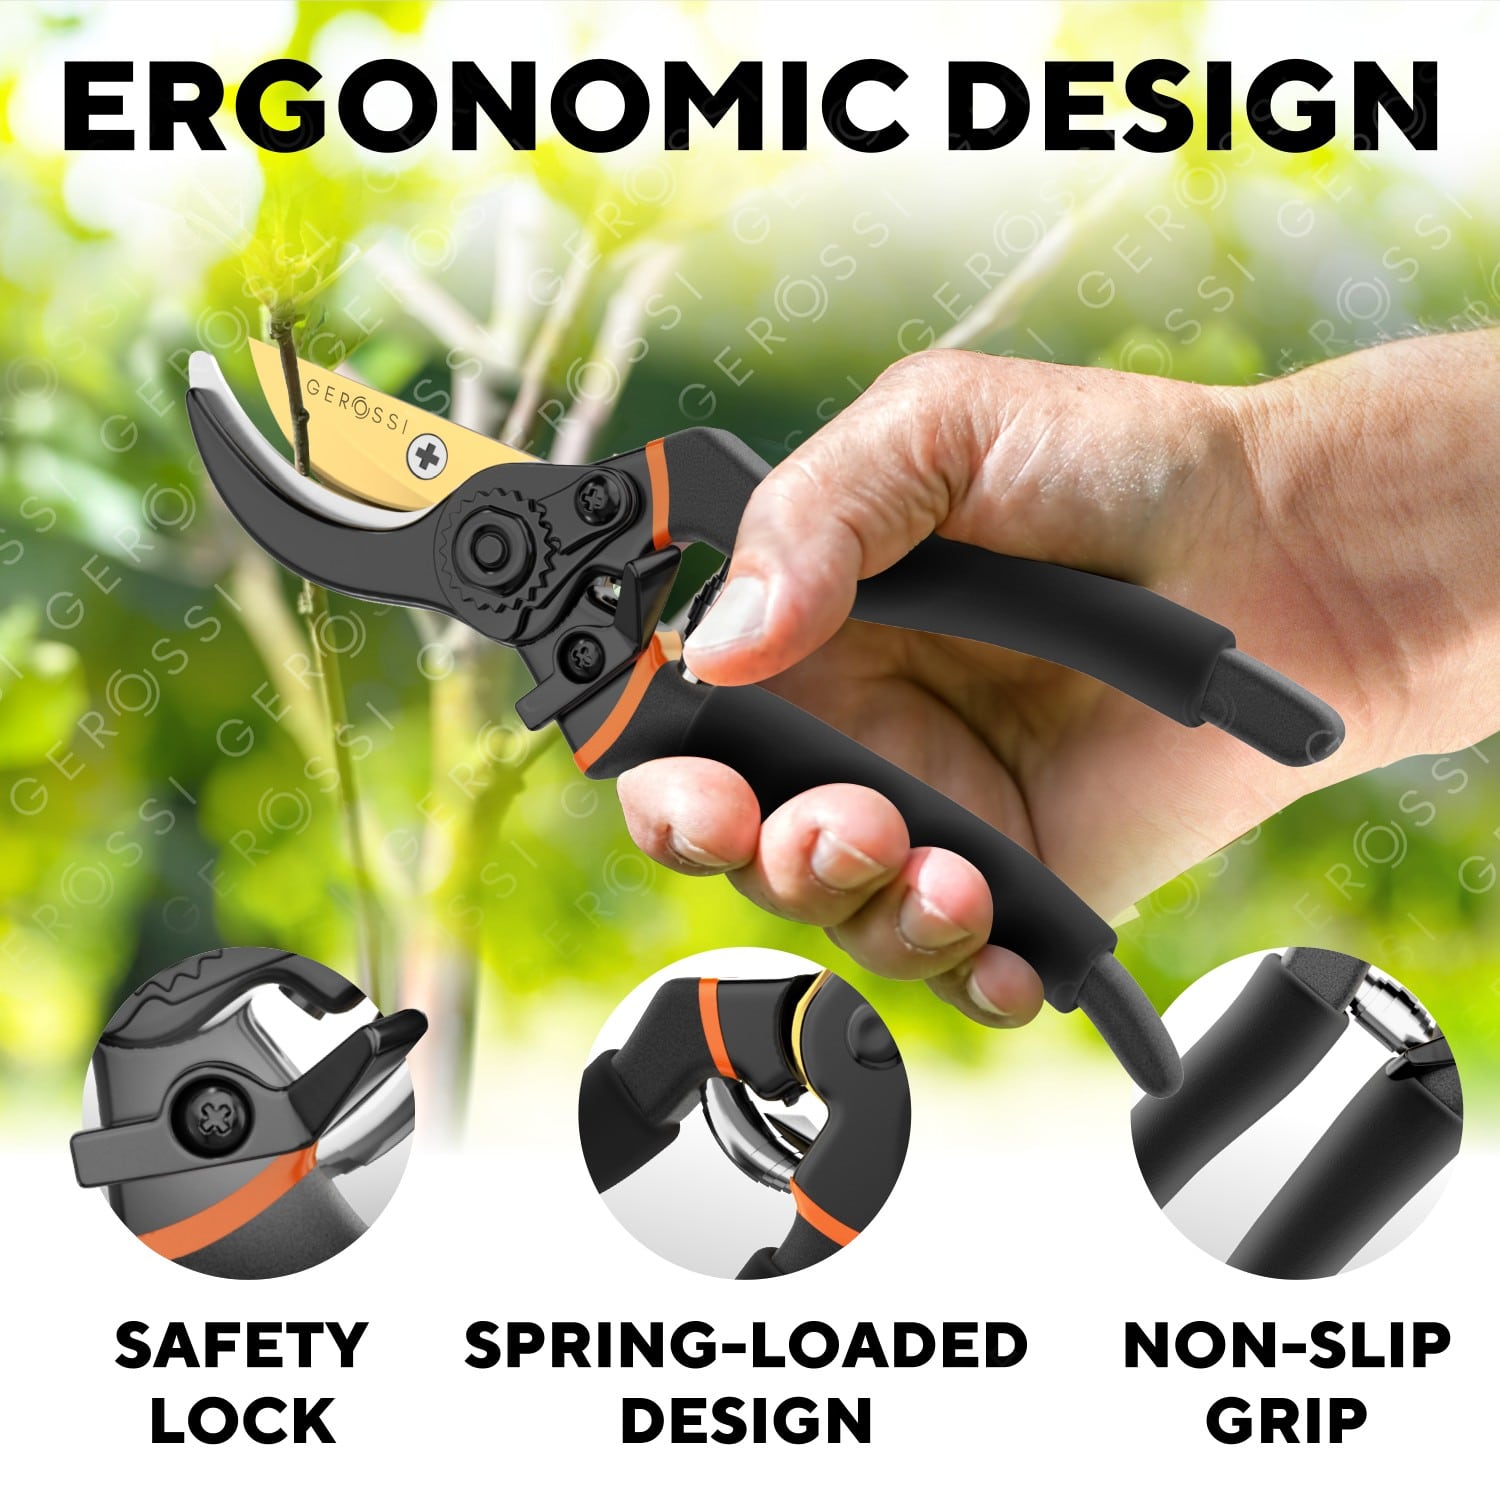 Bypass Pruning Shears - Solid Wood Handle Garden Shears- 8-Inch Built-in Spring Tree Trimmers - Garden Shears Suitable for Small Hands - Ergonomic